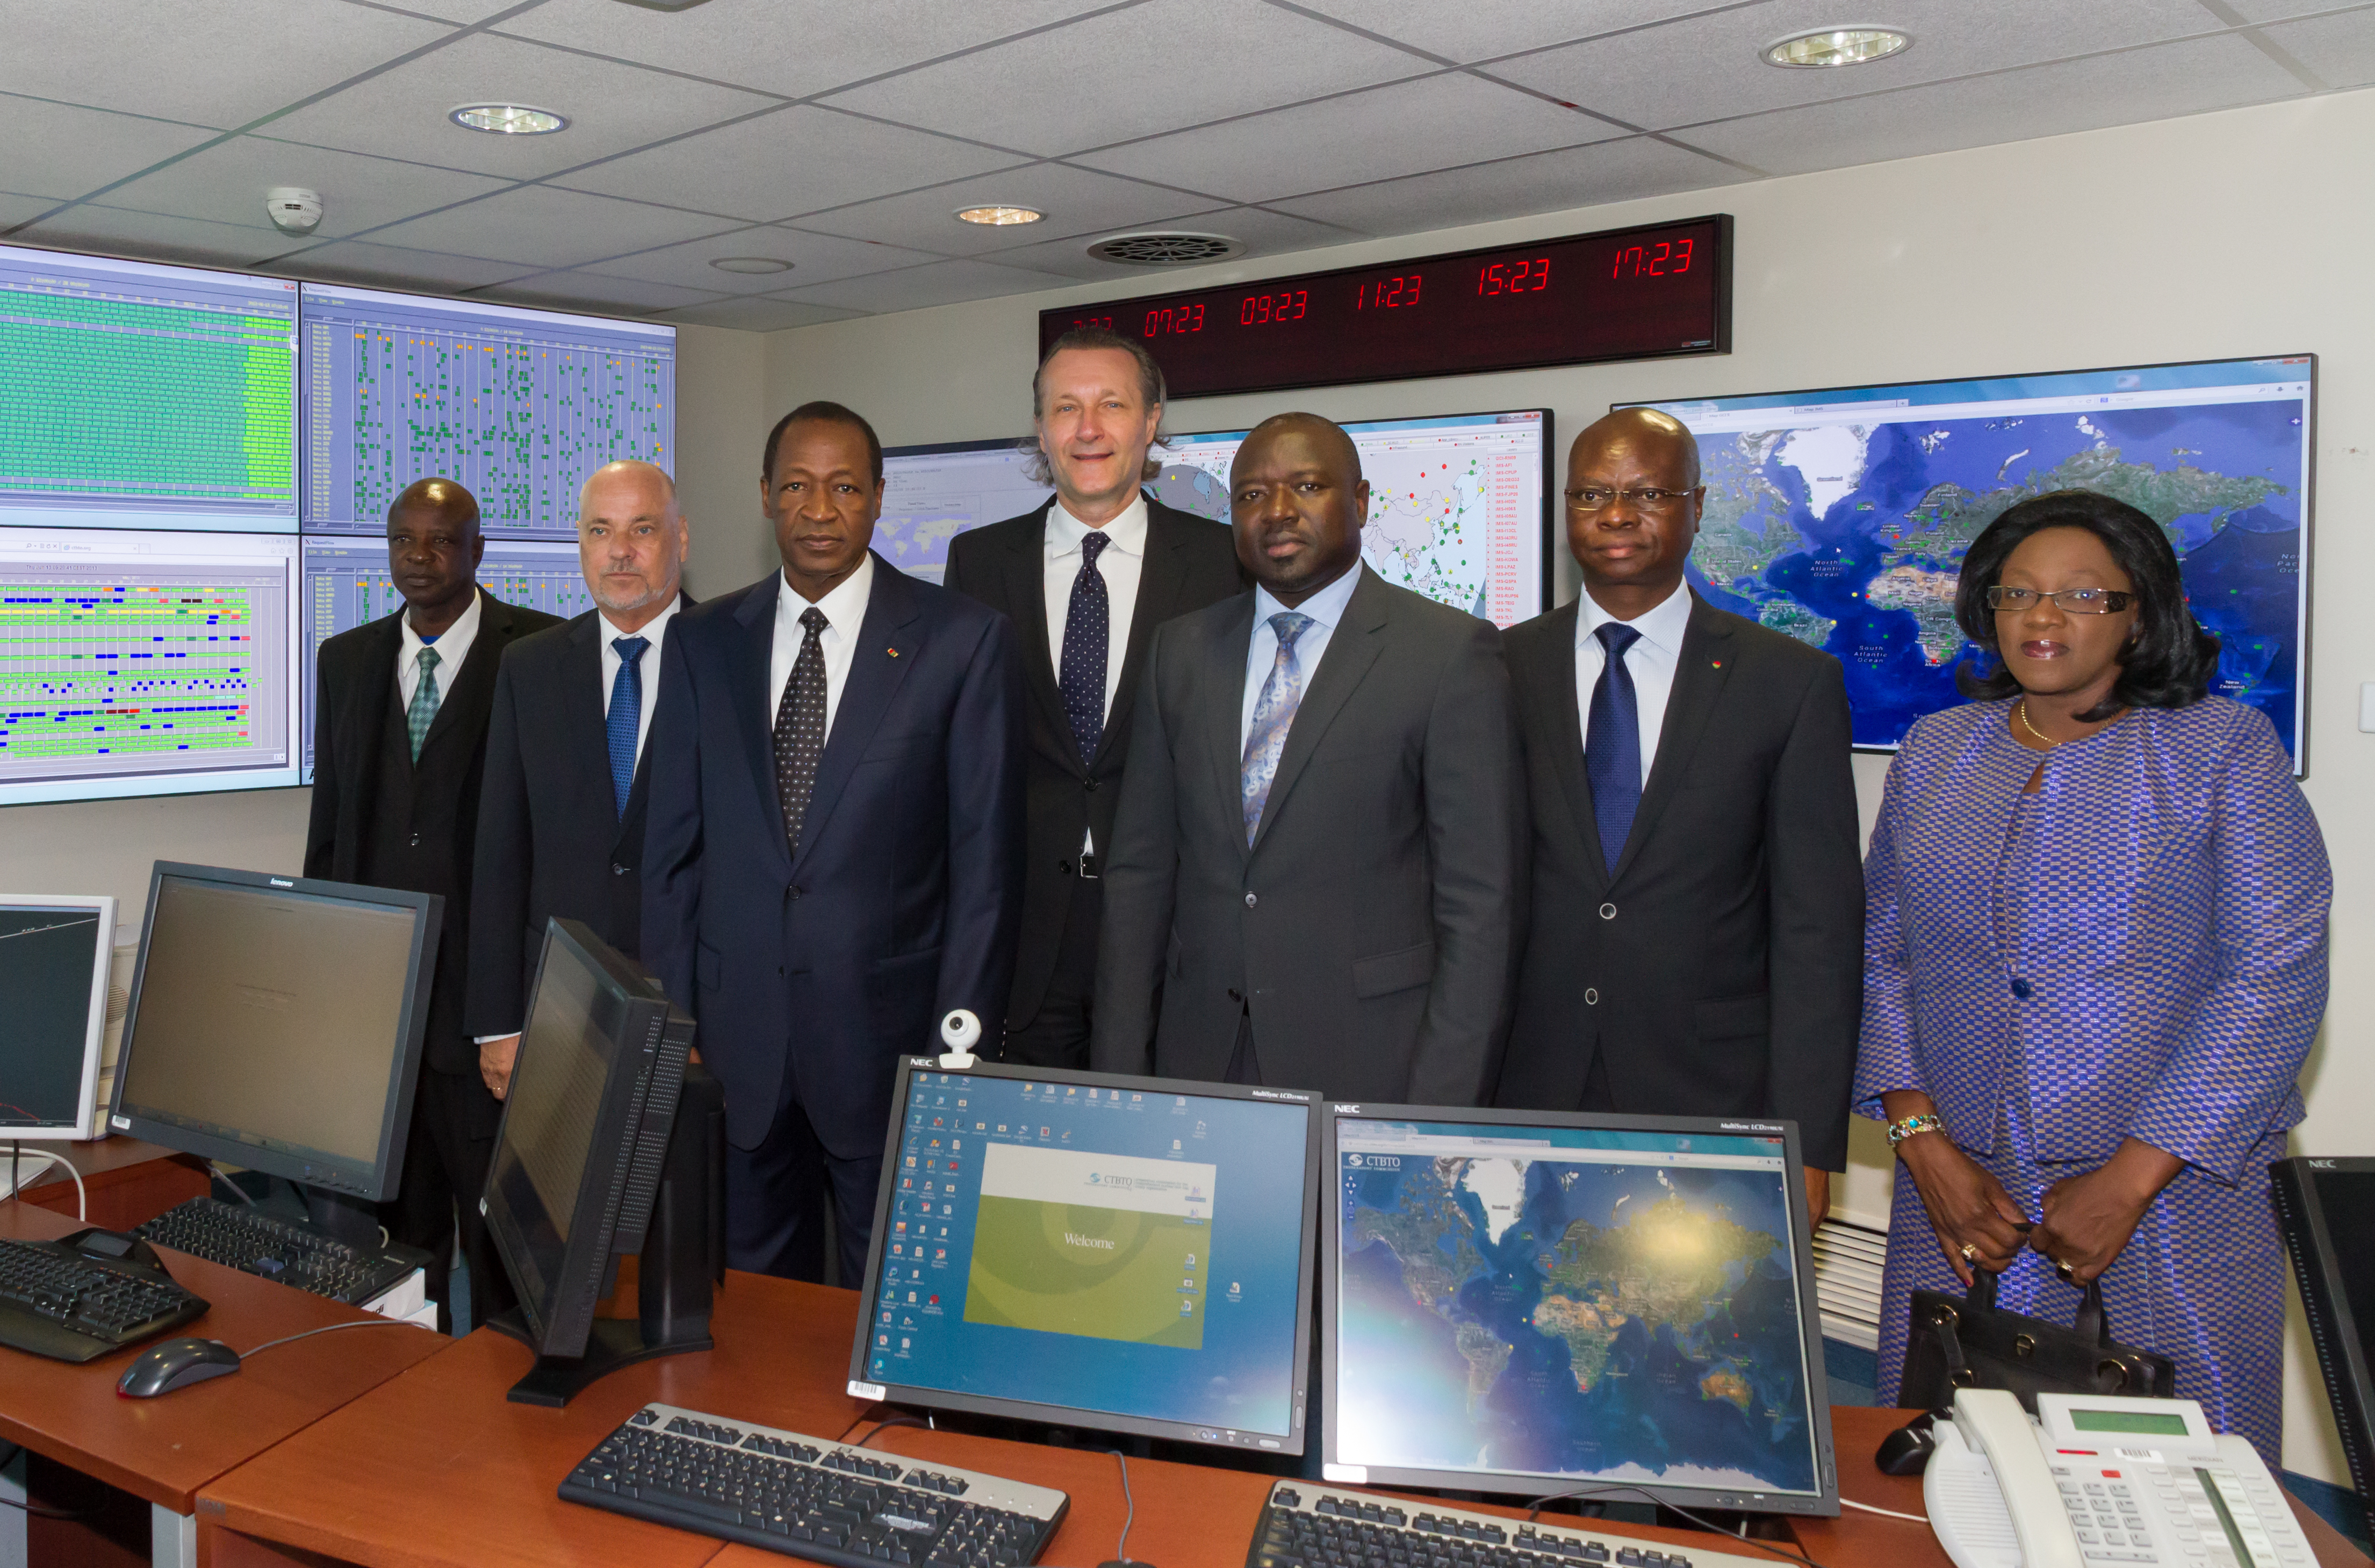 The President of Burkina Faso at the CTBTO (13 June 2013) (9035557678)